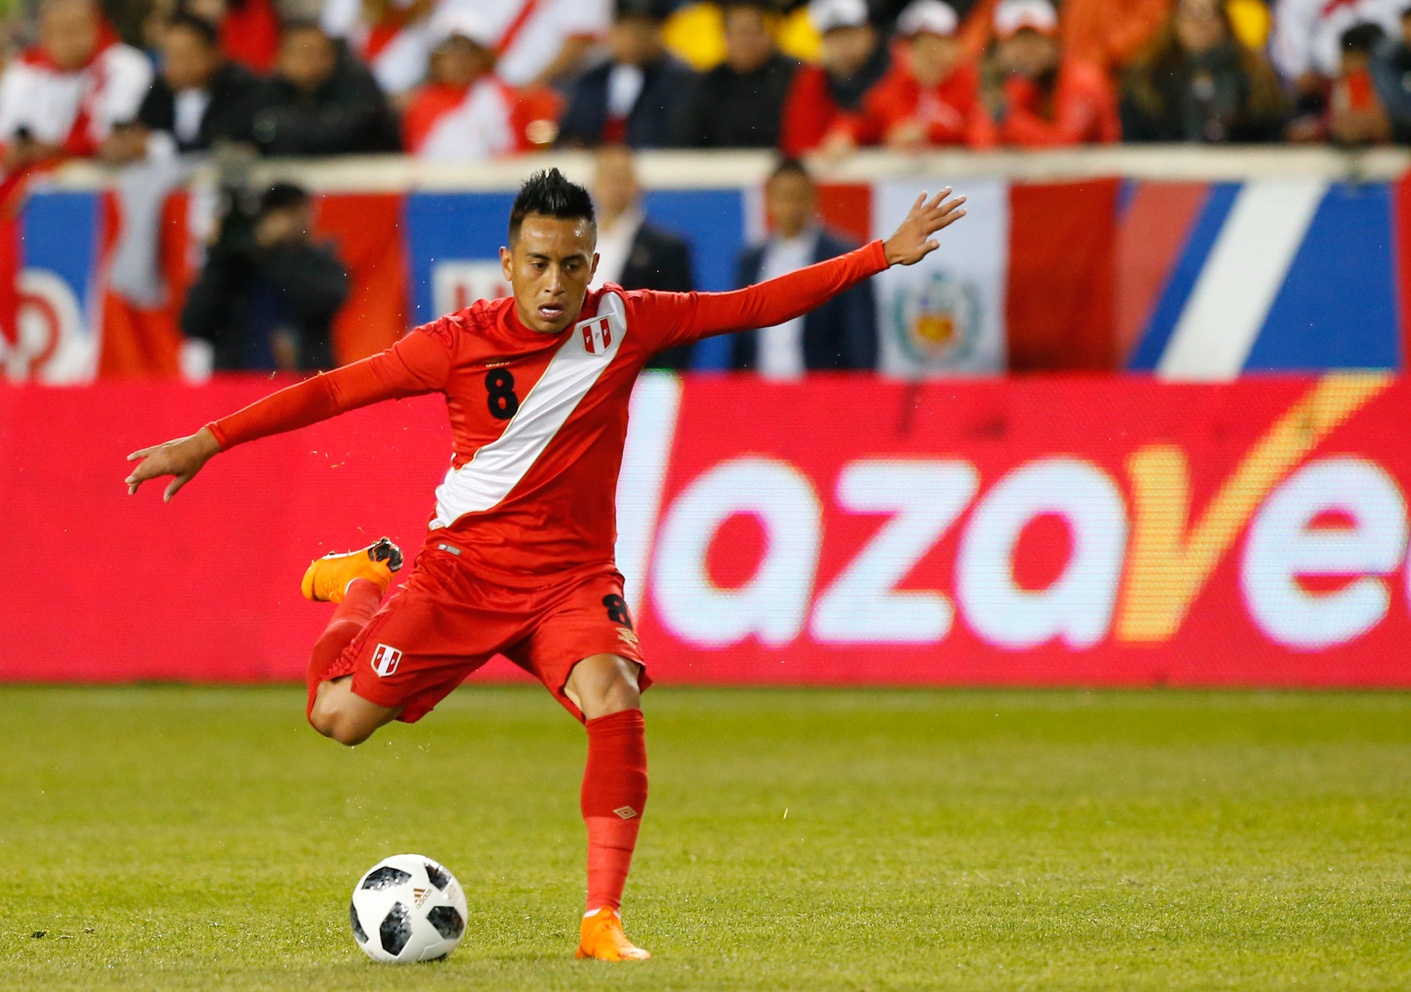 Five Peruvian players MLS clubs should look to sign in 2020 - SBI Soccer